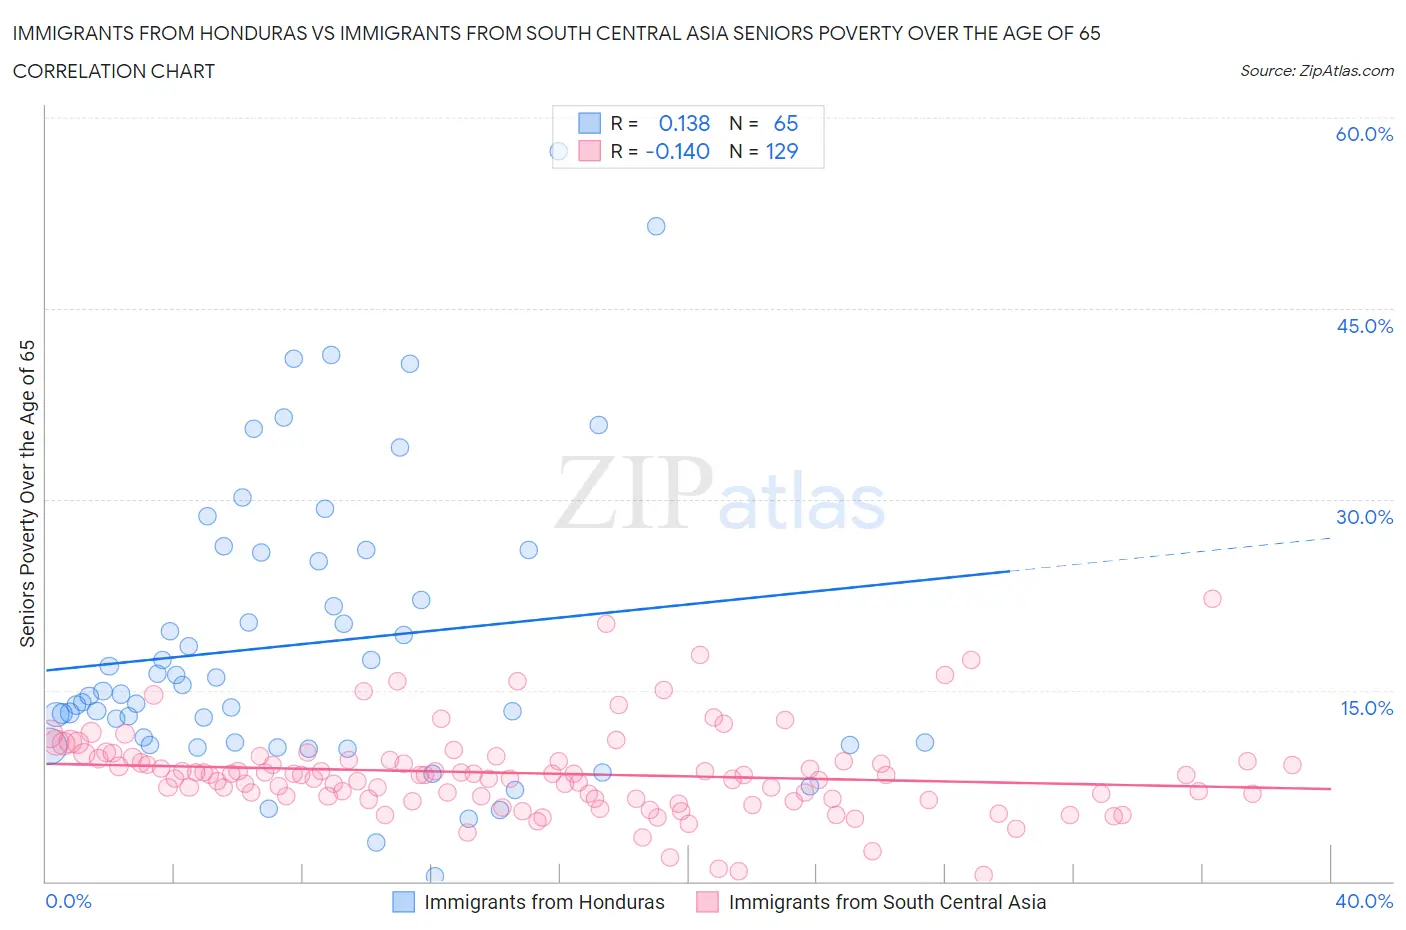 Immigrants from Honduras vs Immigrants from South Central Asia Seniors Poverty Over the Age of 65